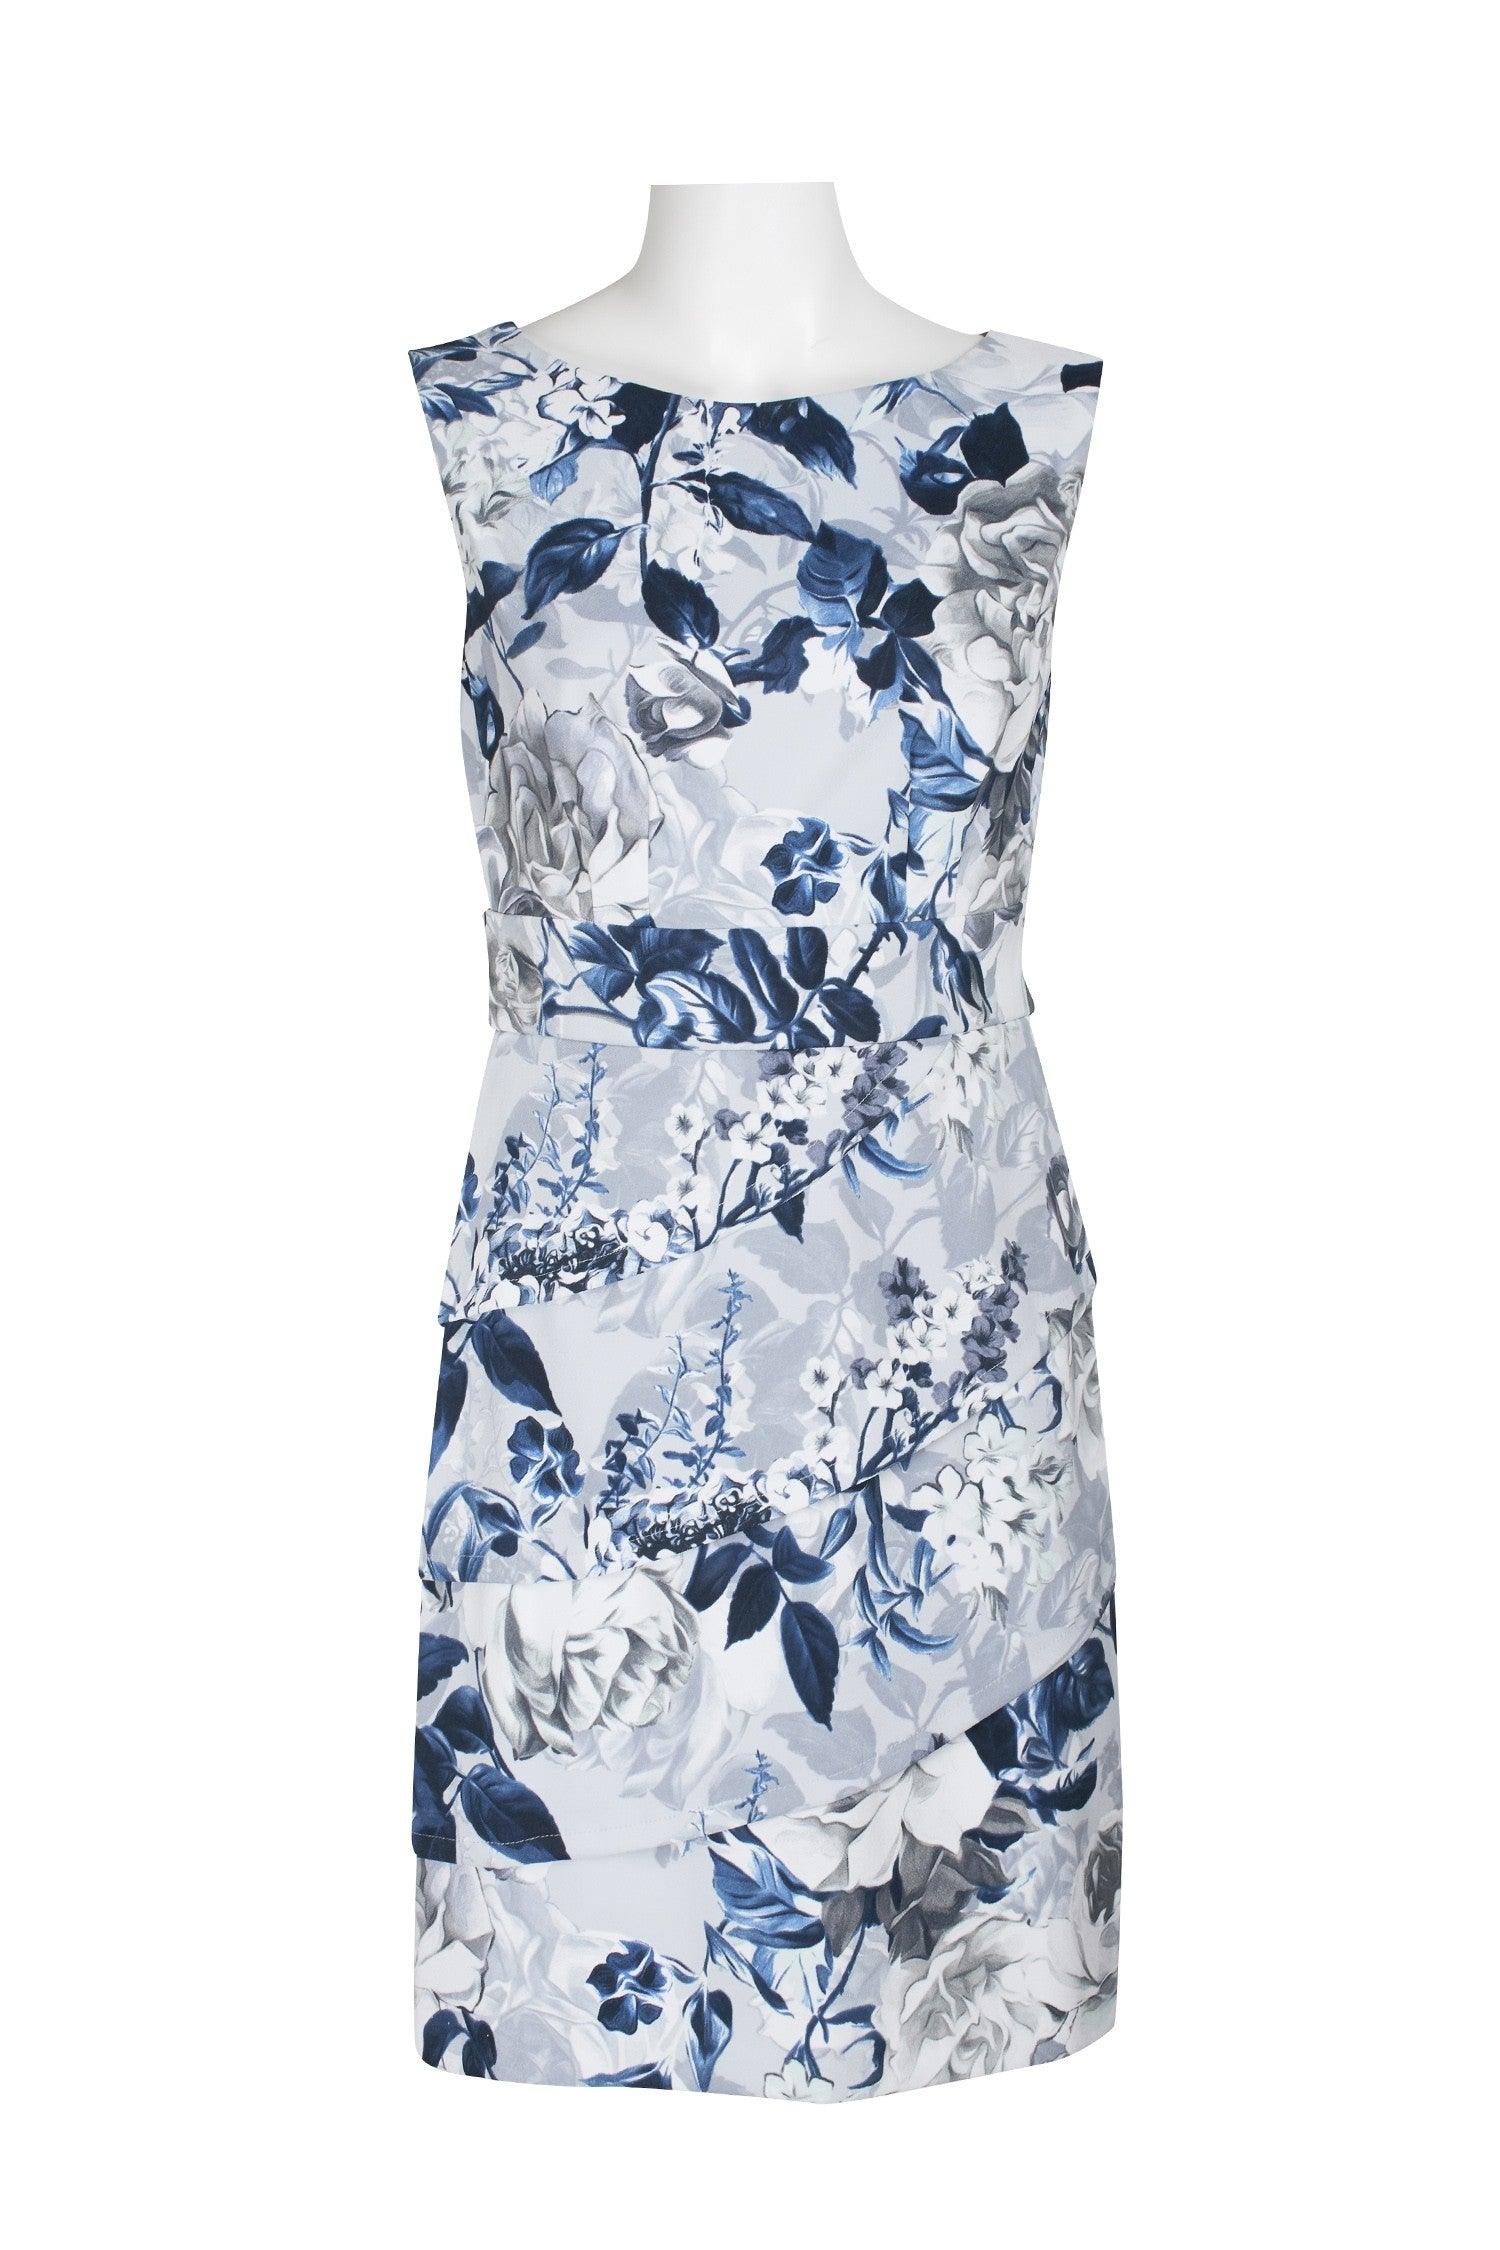 Connected Apparel Short Sleeveless Floral Dress - The Dress Outlet